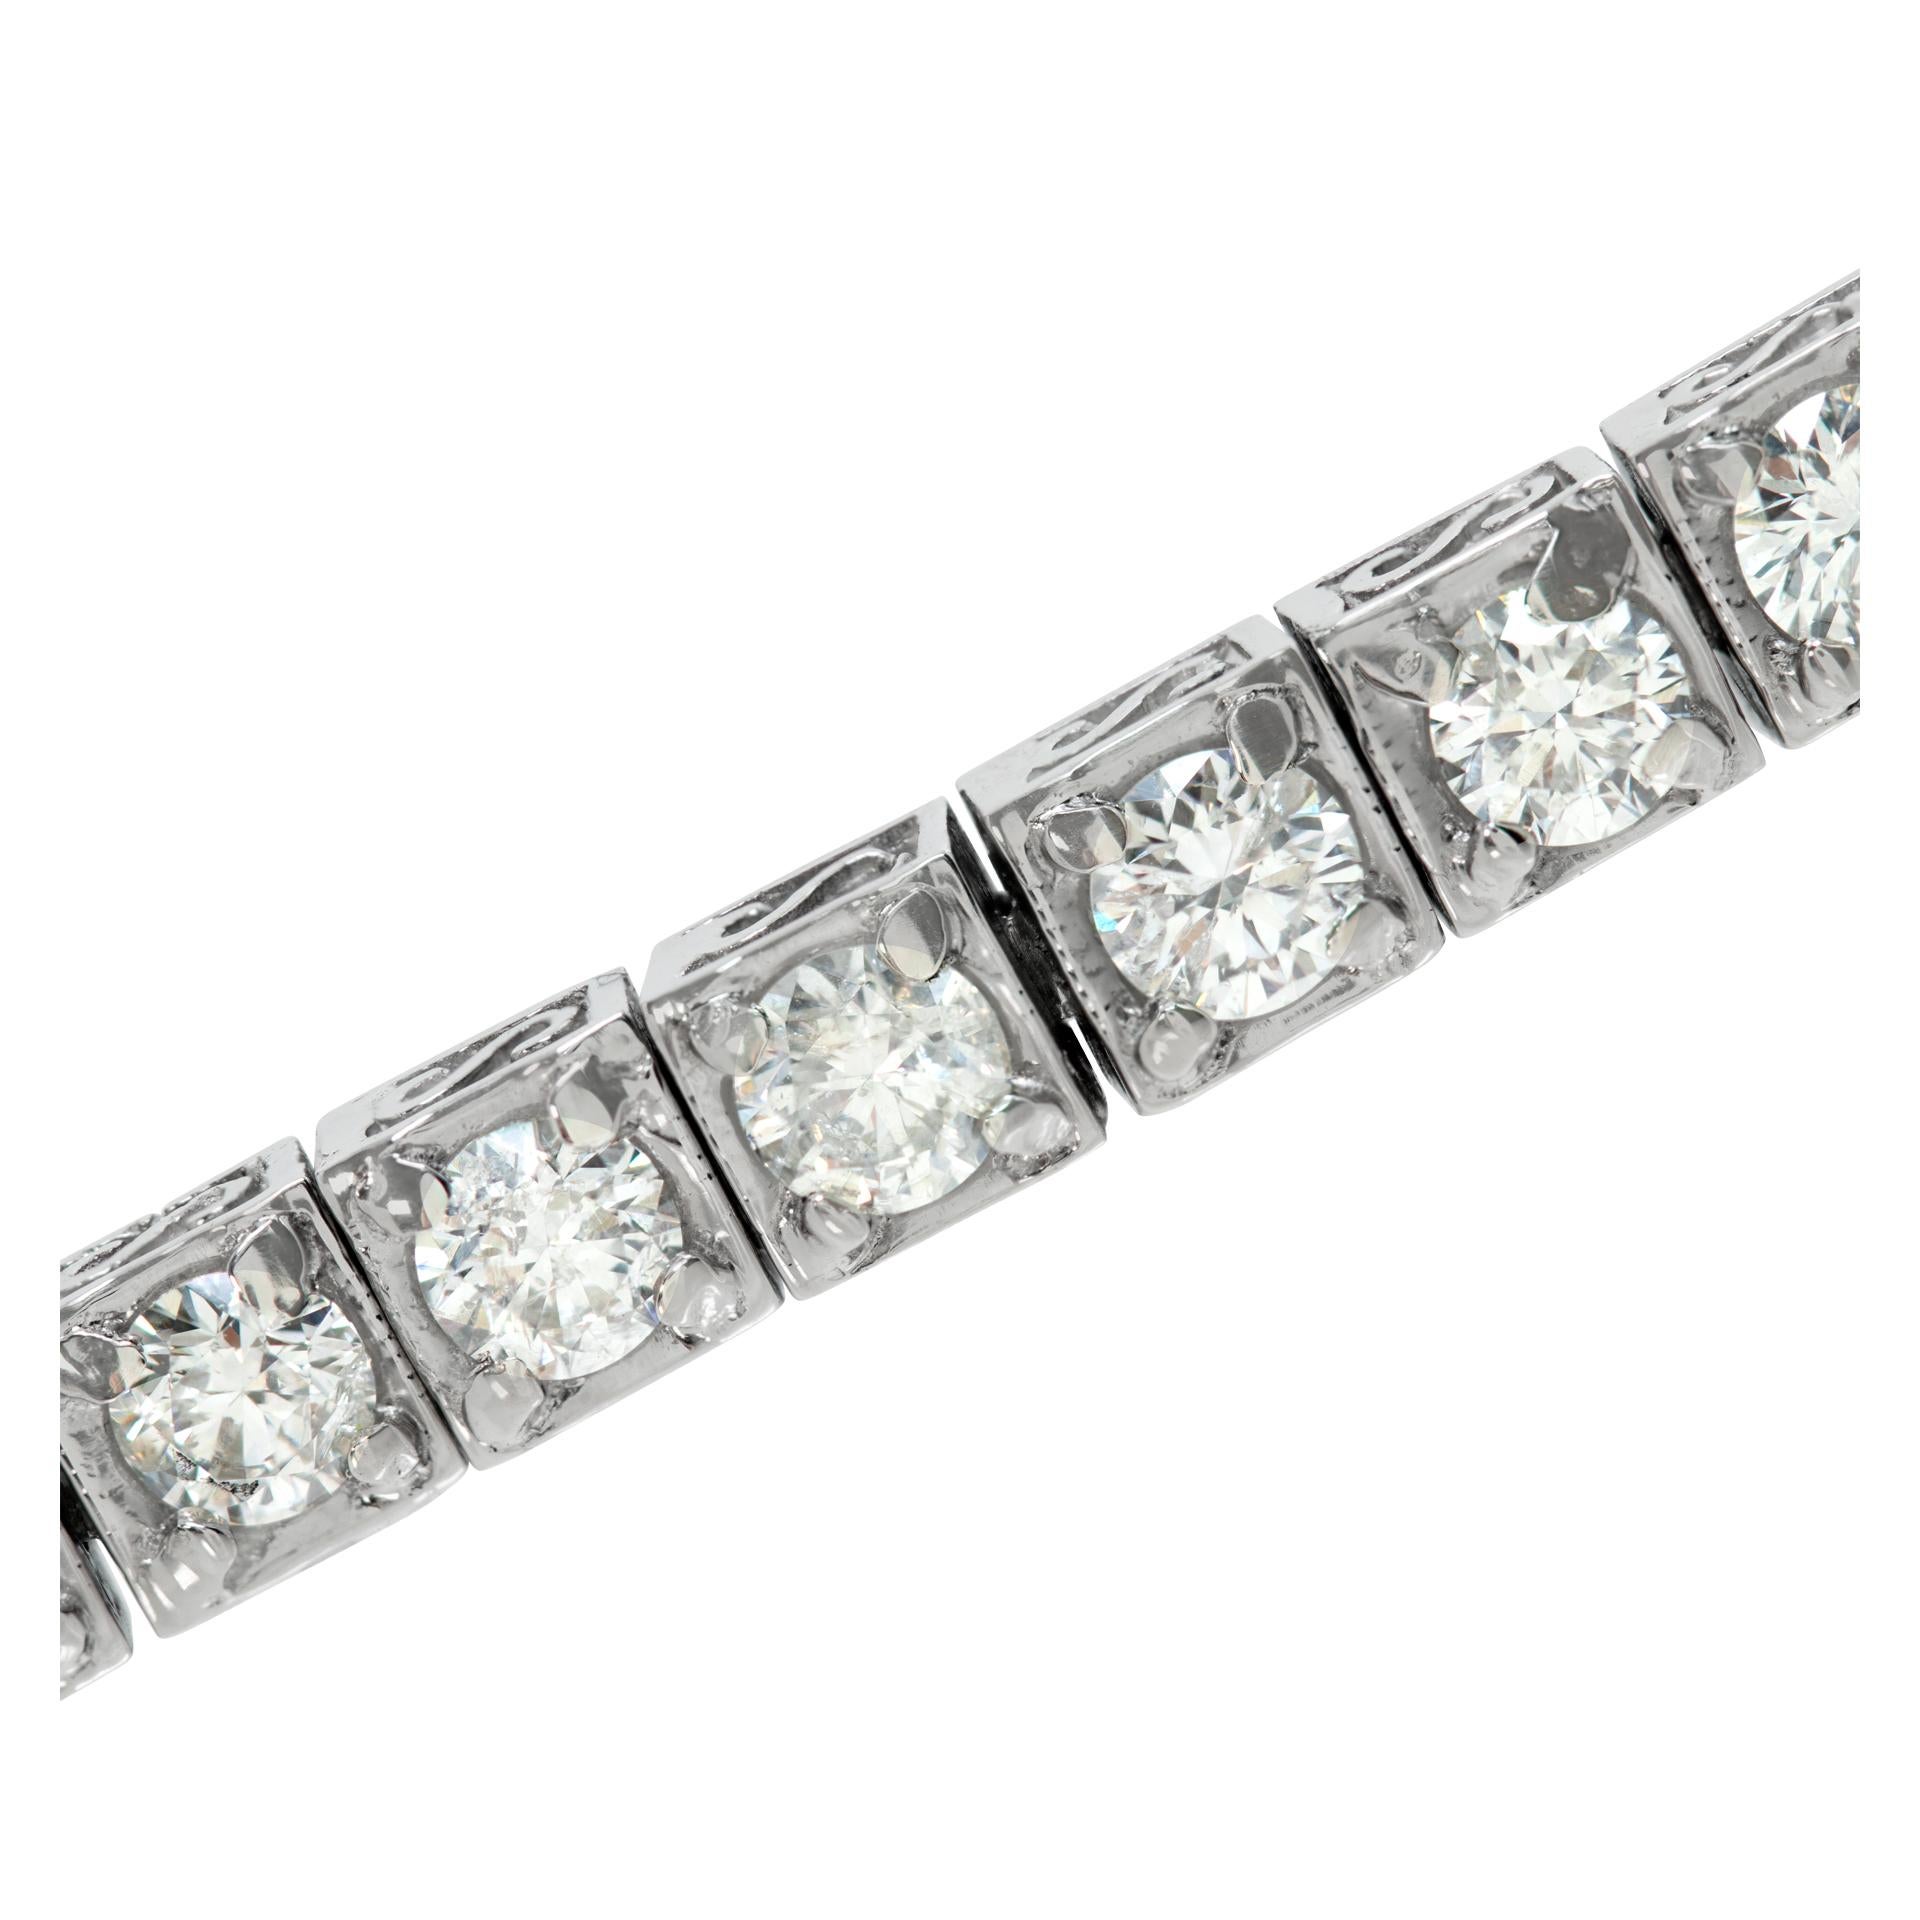 Diamond bracelet with round brilliant cut diamonds 7.05 carats H-I color, SI-I clarity set in platinum 4 prong setting. Total 35 diamonds 0.20 carats each. Length 7 inches. Width 5 mm.
